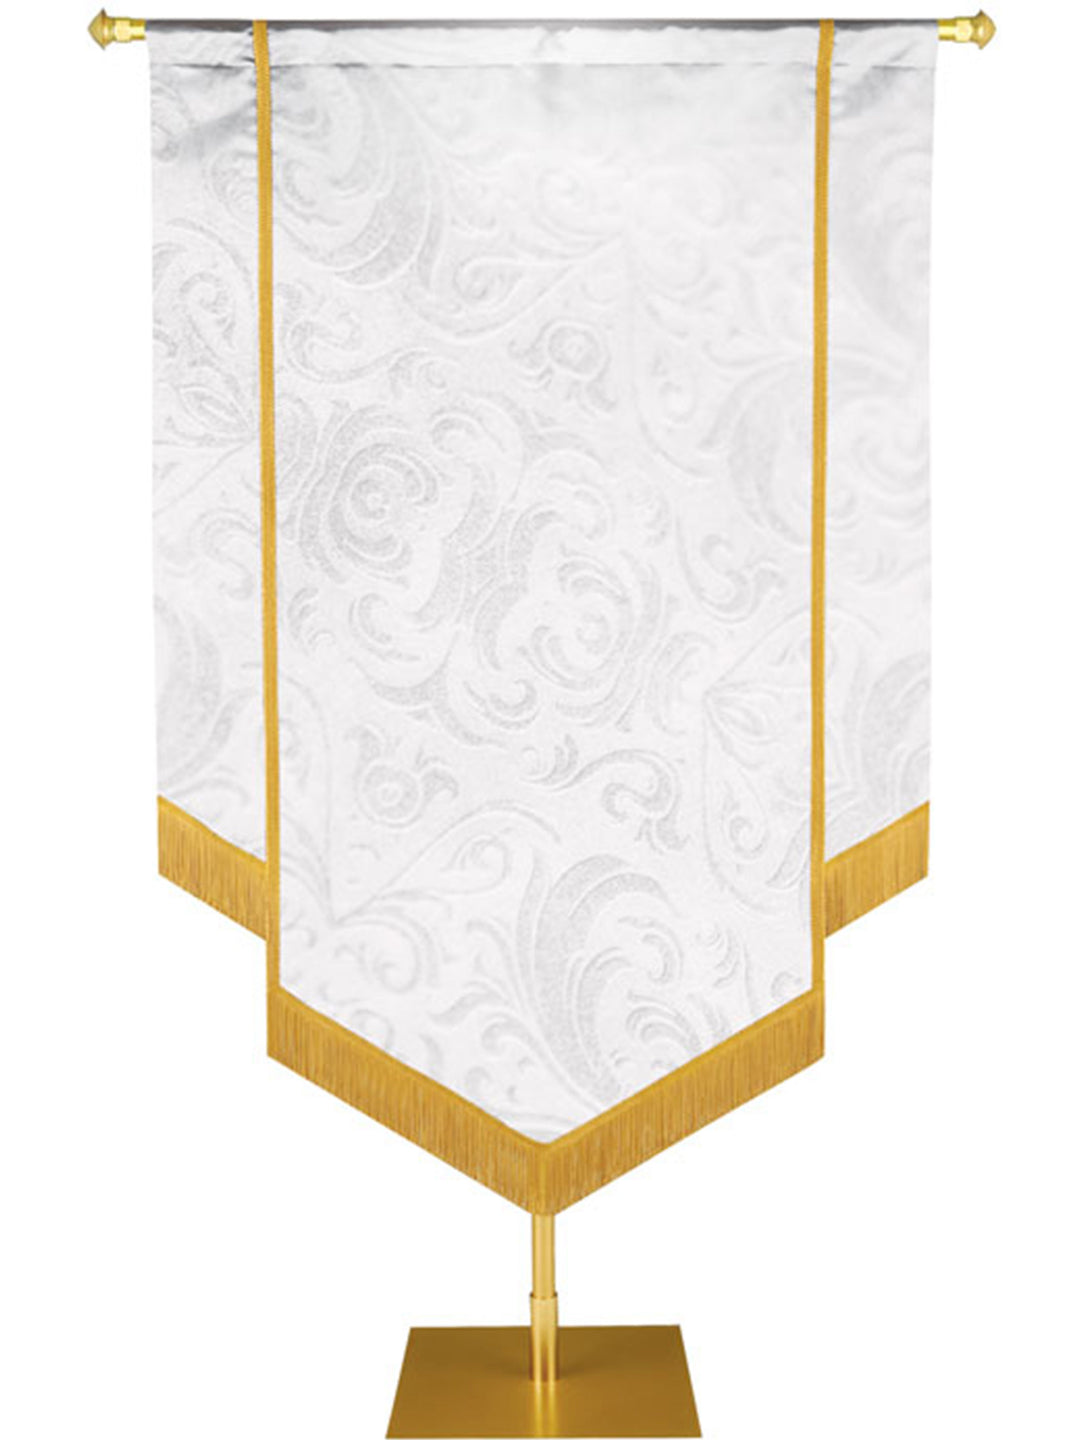 Custom Embellished Banner in 8 Color Options - Custom Hand Crafted Banners - PraiseBanners